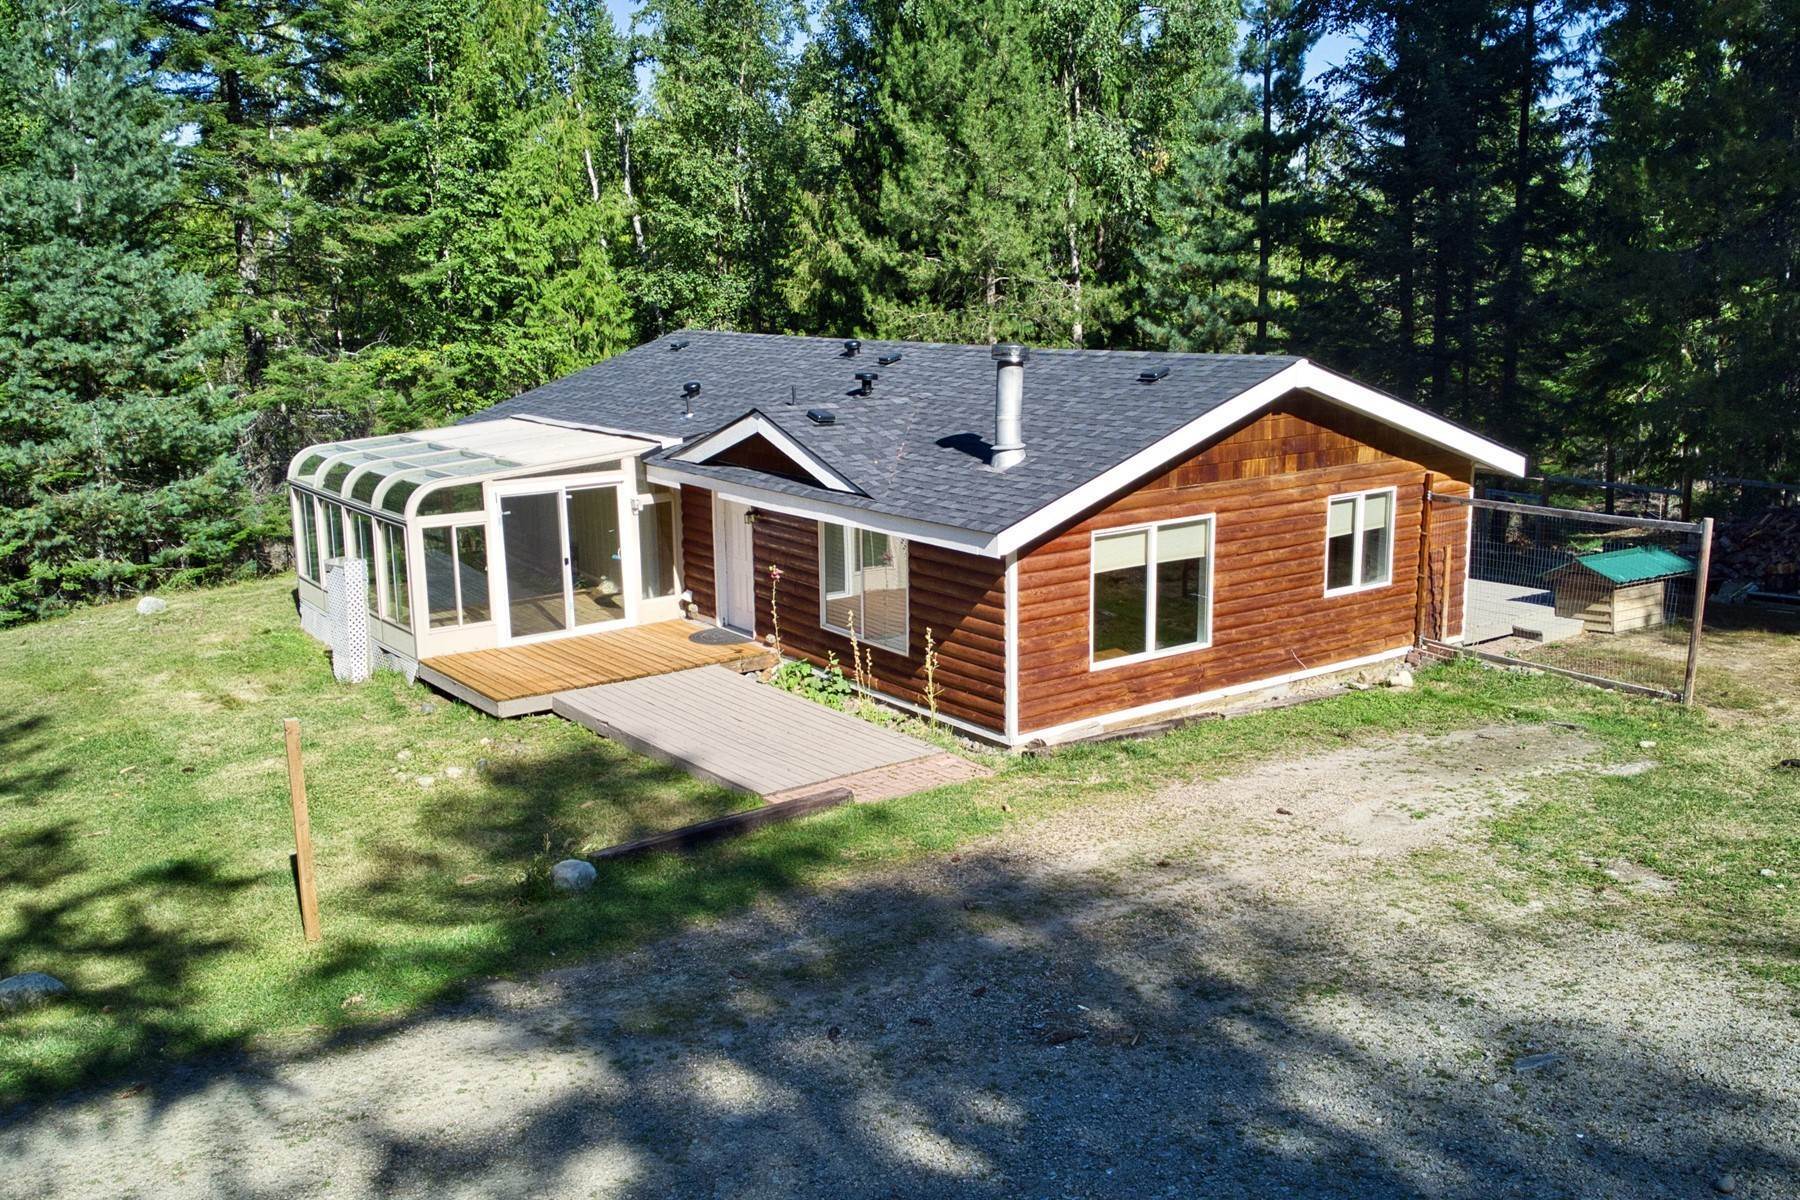 2. Single Family Homes for Sale at 2831 Flume Creek Road, Sandpoint, ID. 2831 Flume Creek Rd Sandpoint, Idaho 83864 United States